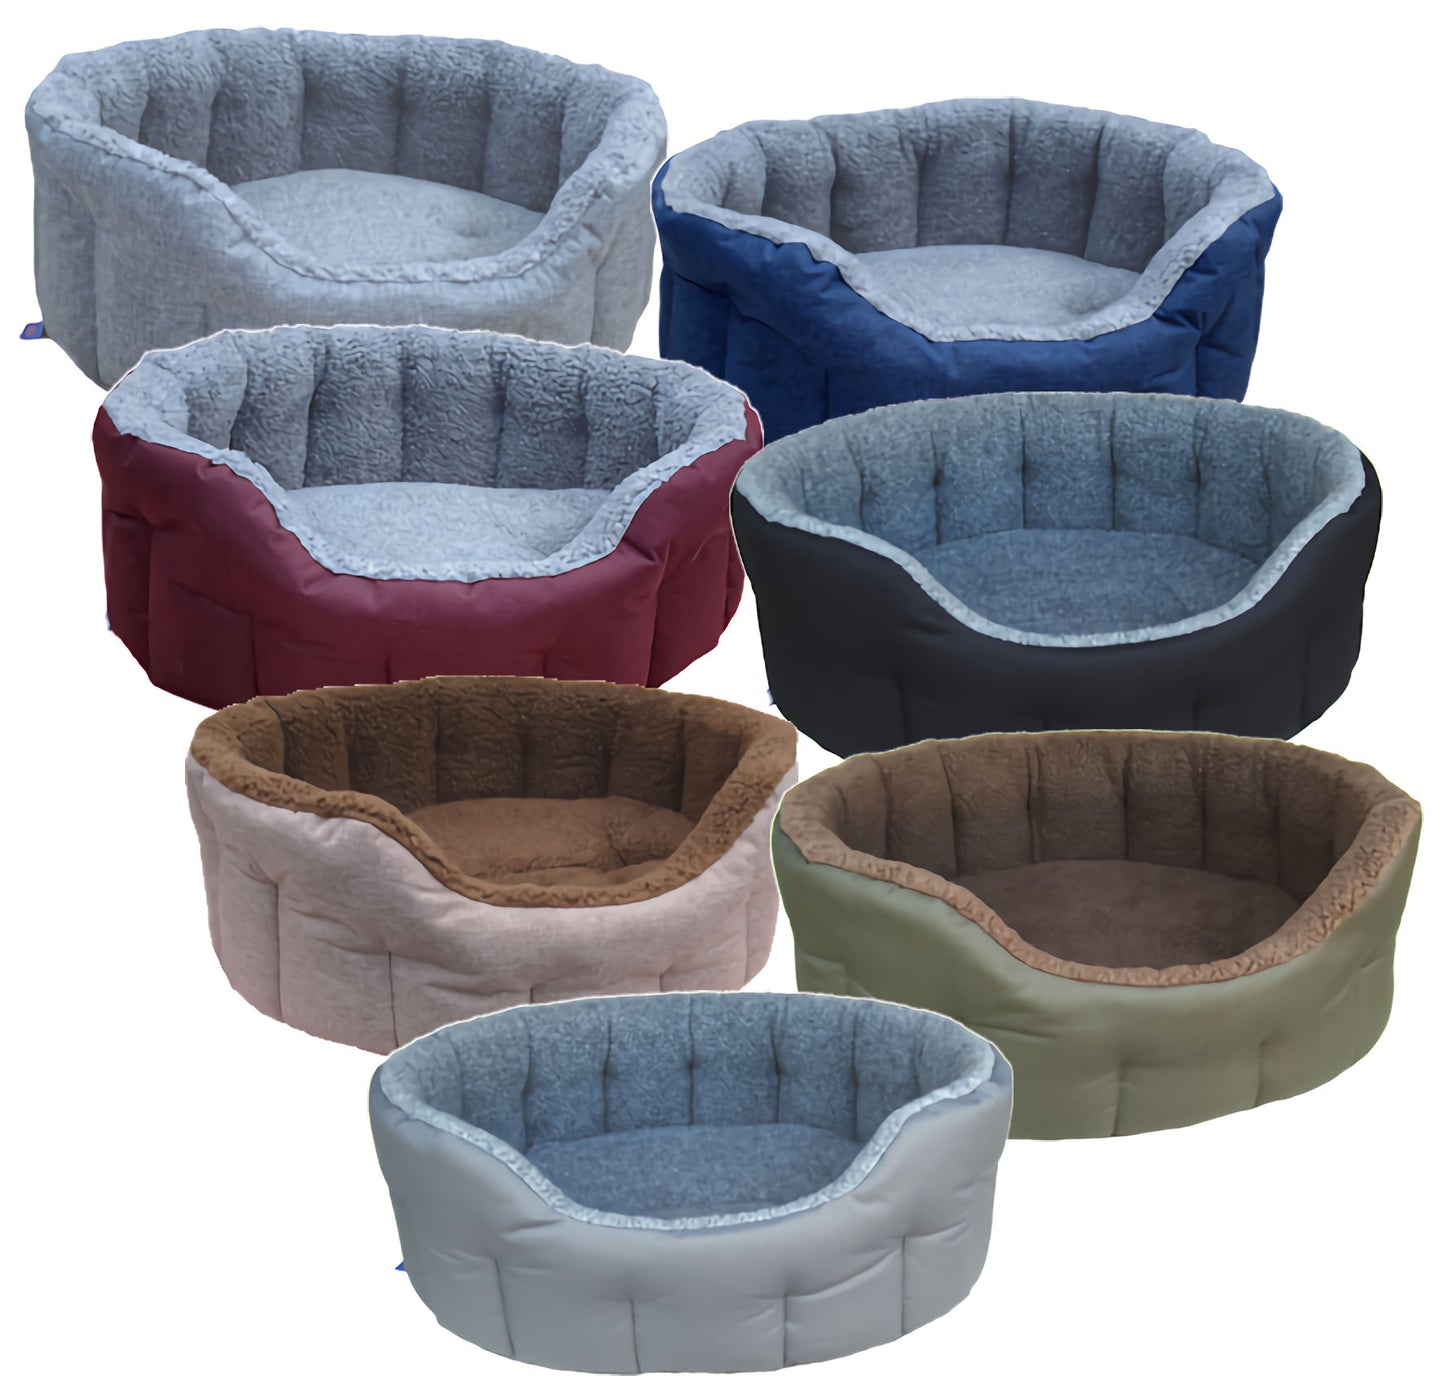 Premium Oval Bolster Drop Fronted Style Heavy Duty Polyester material with Sherpa Fleece Lining Dog Beds